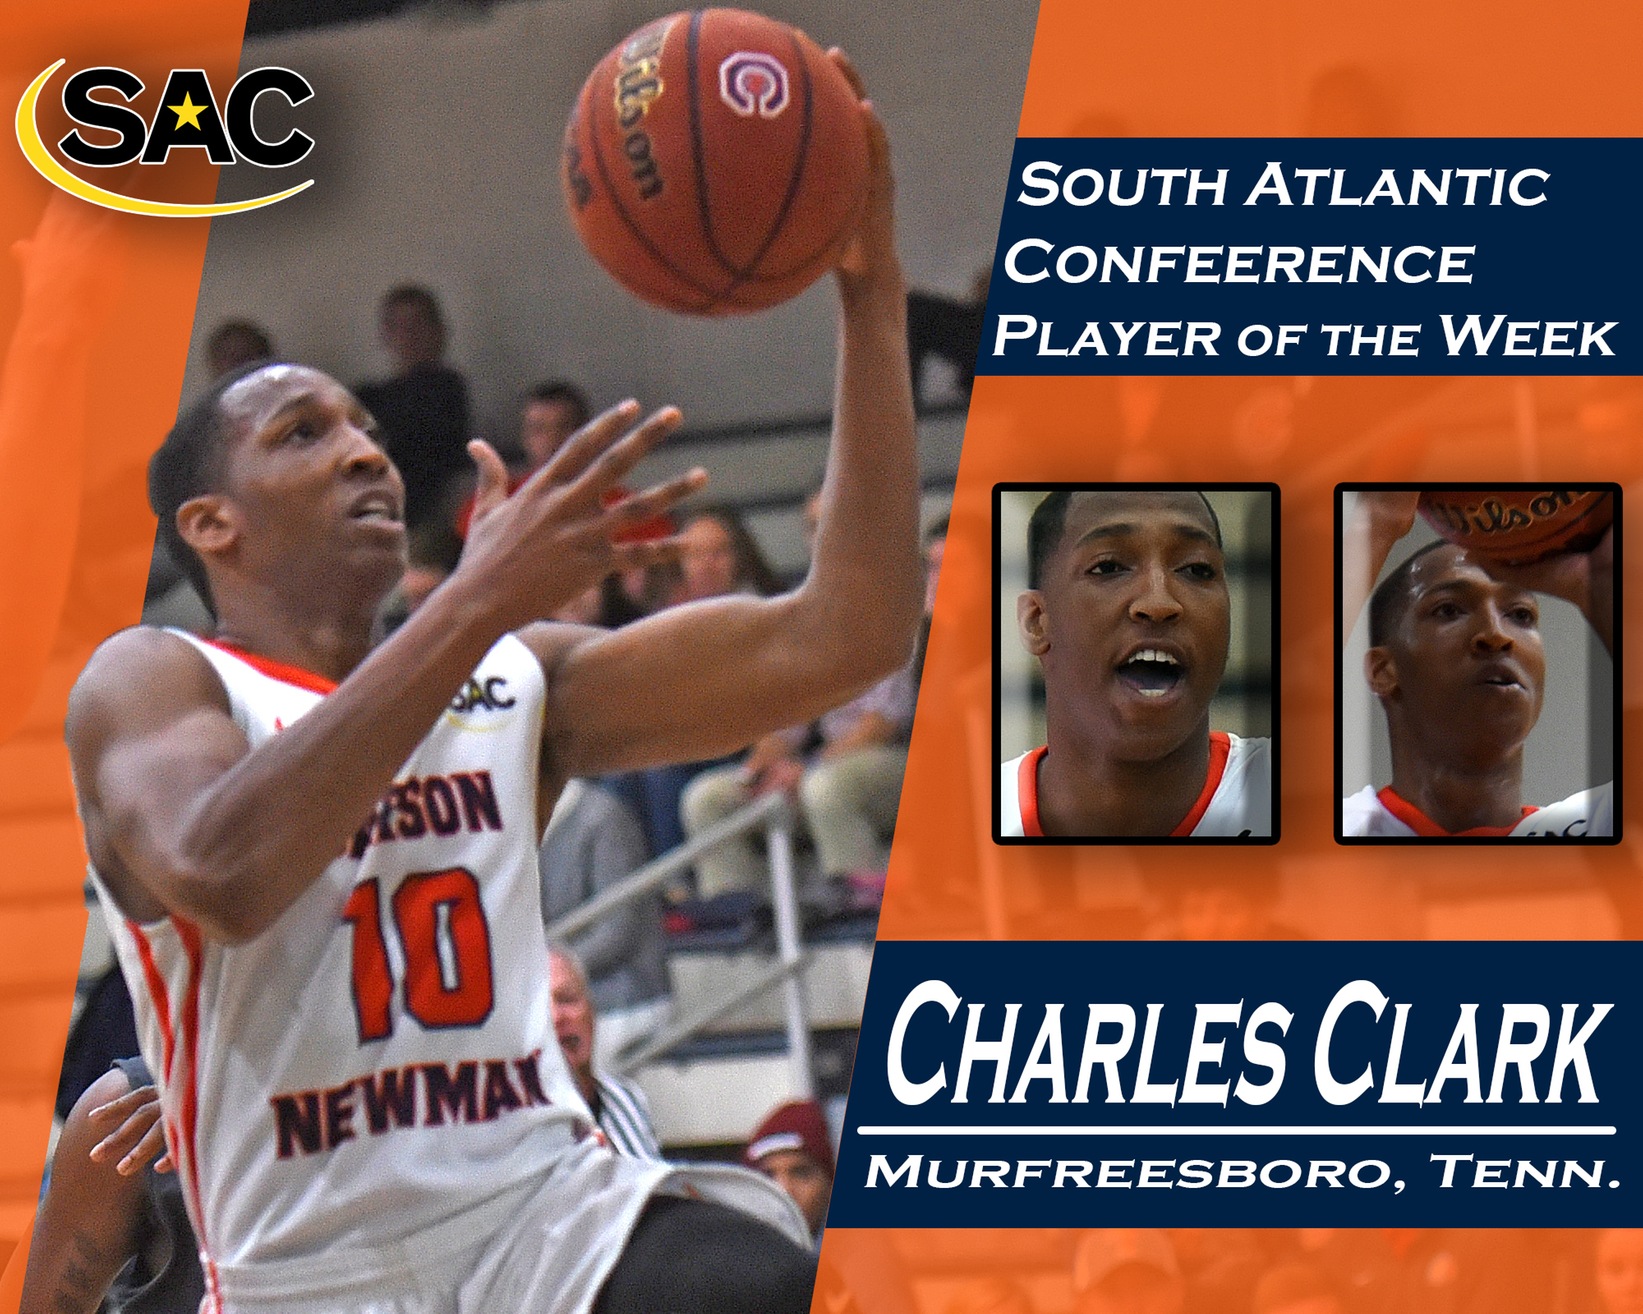 Clark nets eighth career South Atlantic Conference player of the week honor